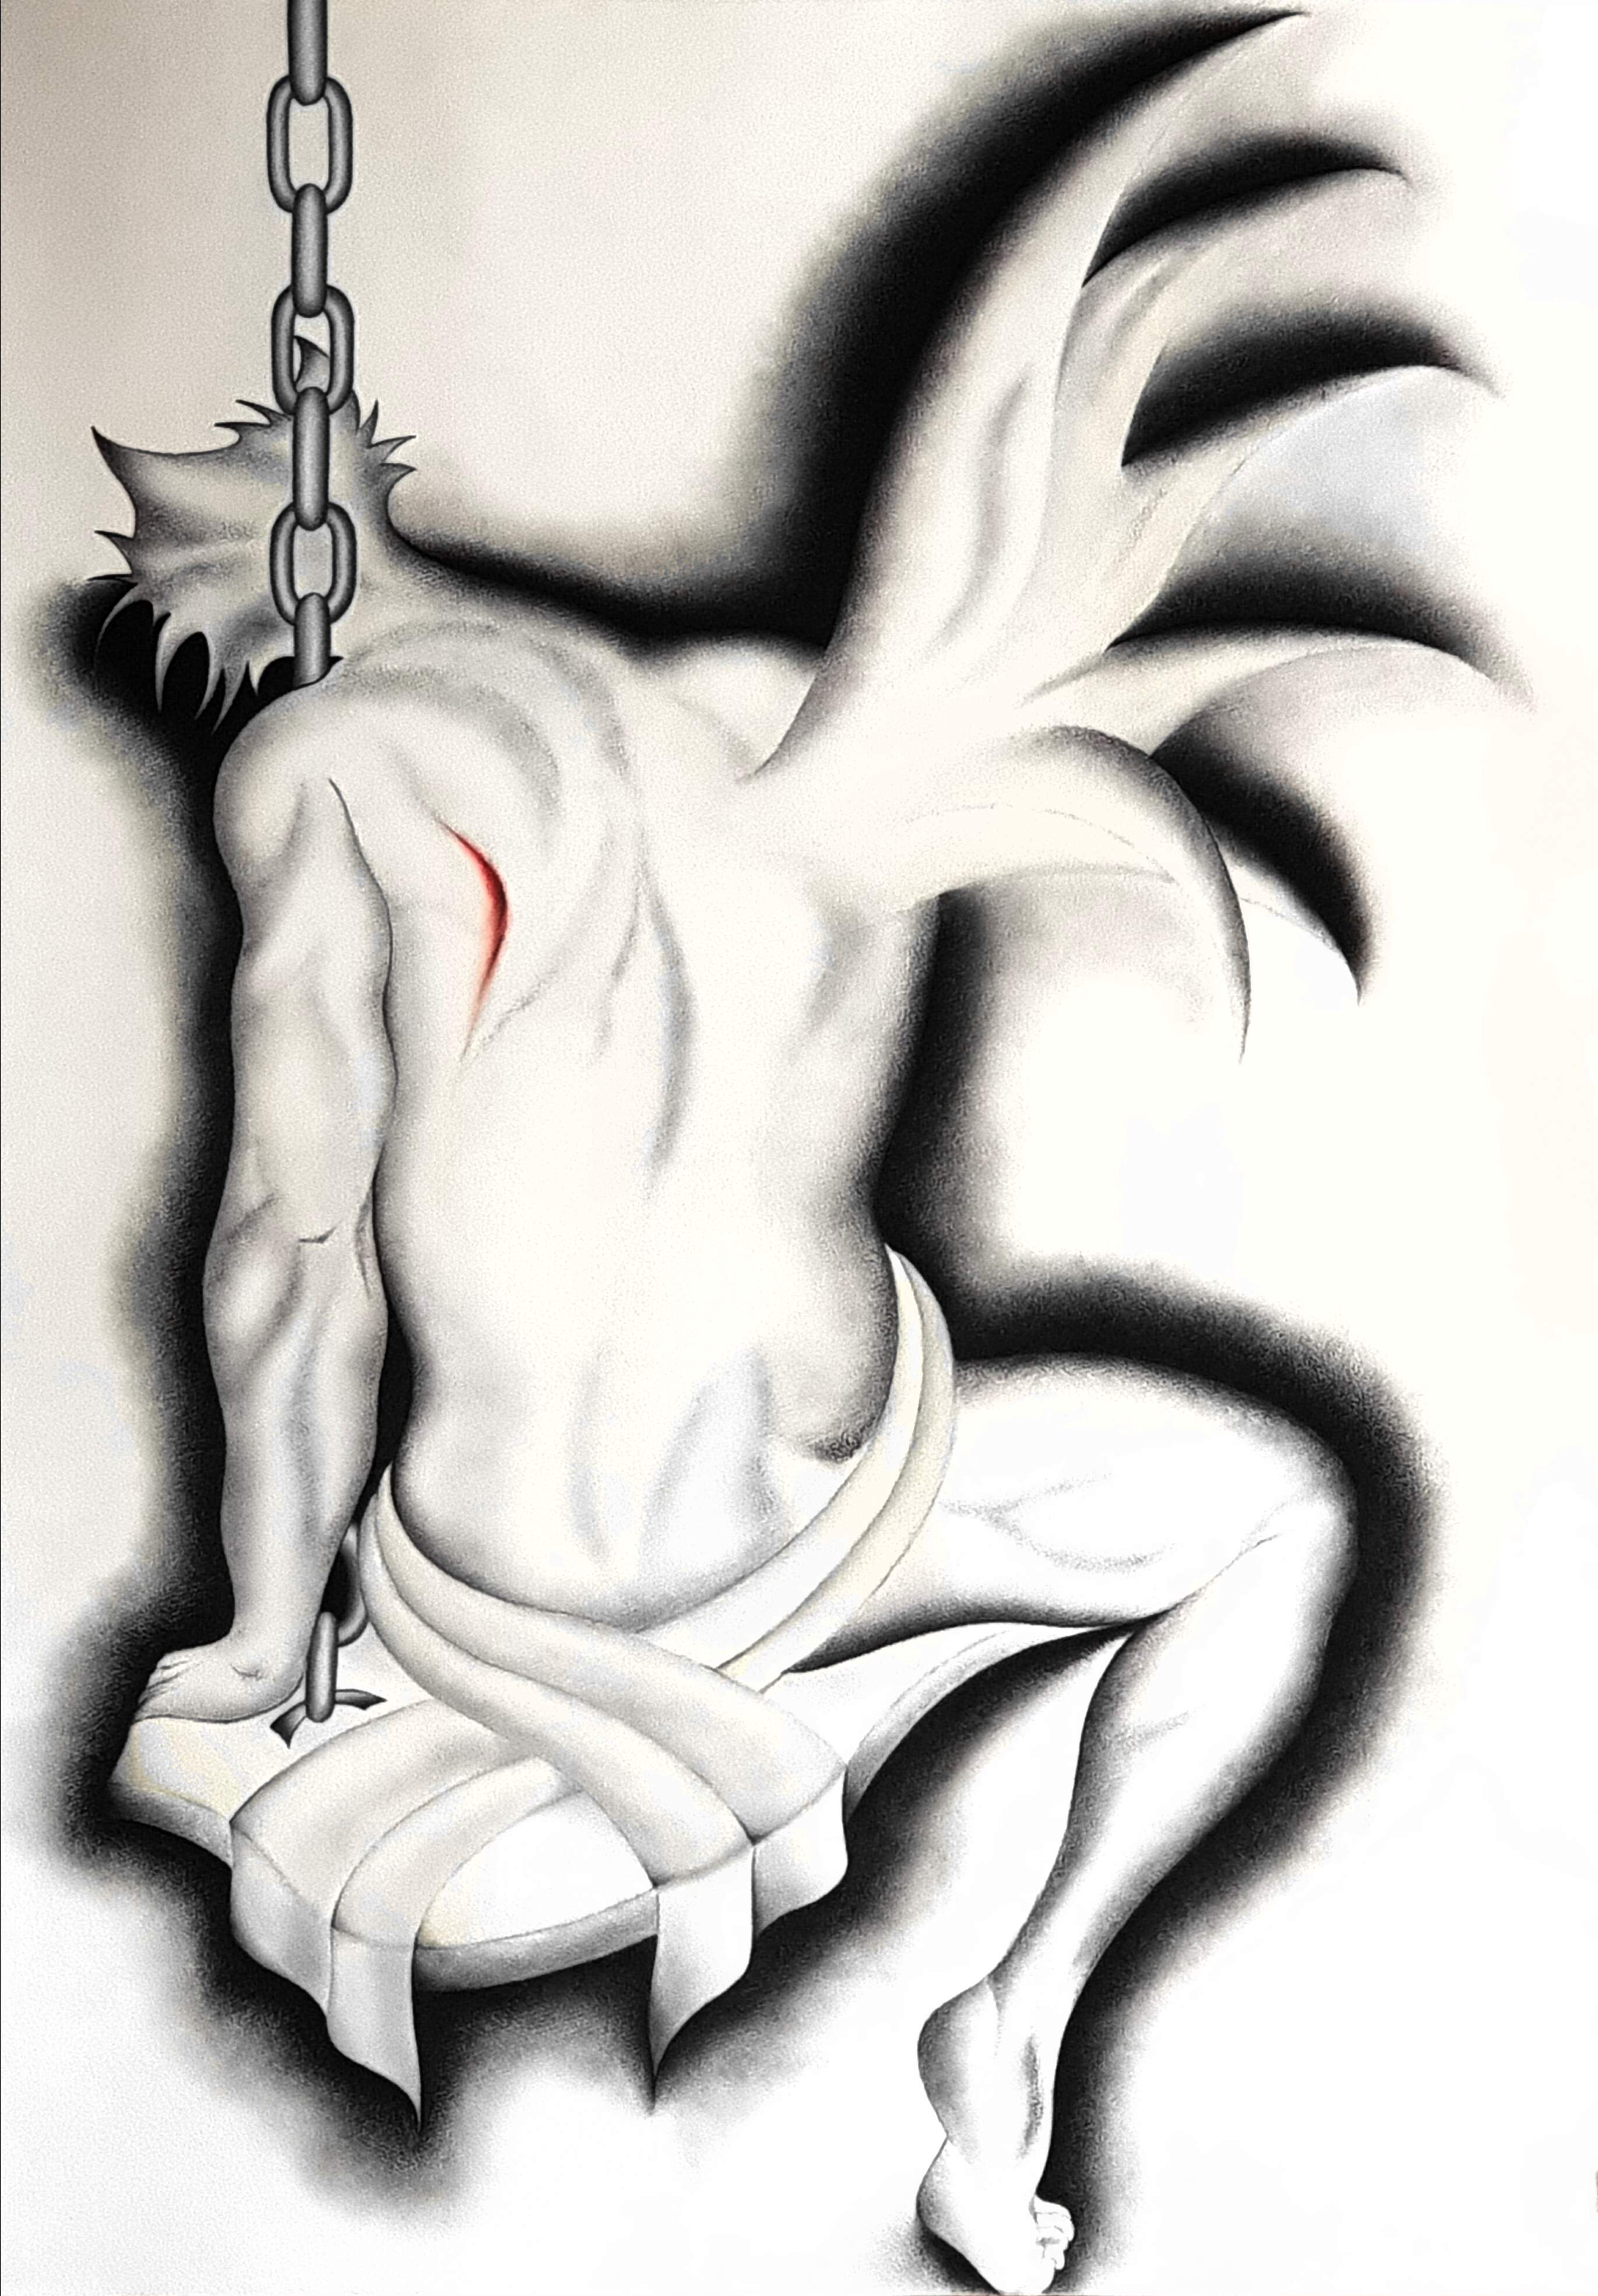 ""Lost" - 2020 - pastel, graphite powders and charcoal on woven paper - cm 70x100 - Quotation € 1000.00